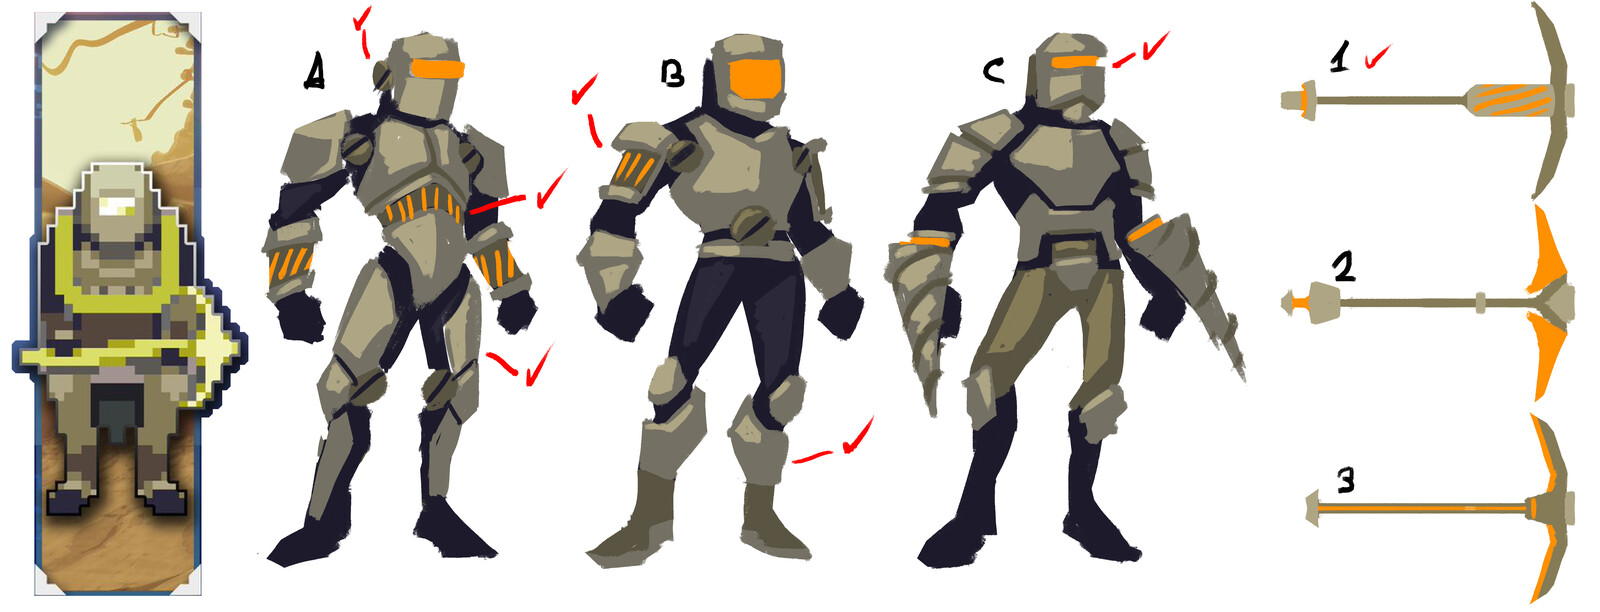 the leftmost picture here is the main reference i used for the character design. 